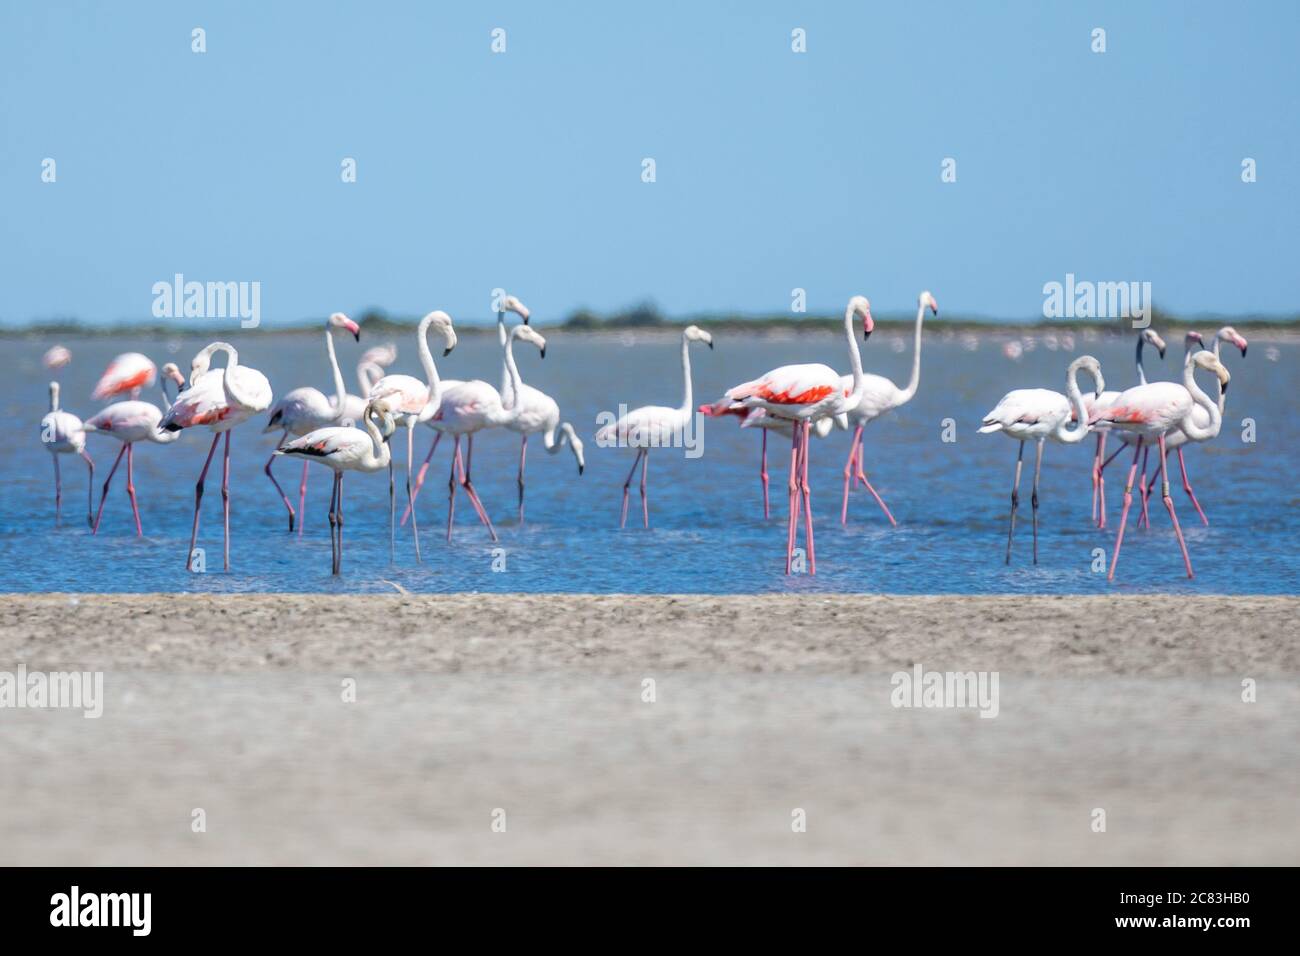 Close up of a french beach full of wild flamingos standing in shallow water, against a blue summer sky Stock Photo